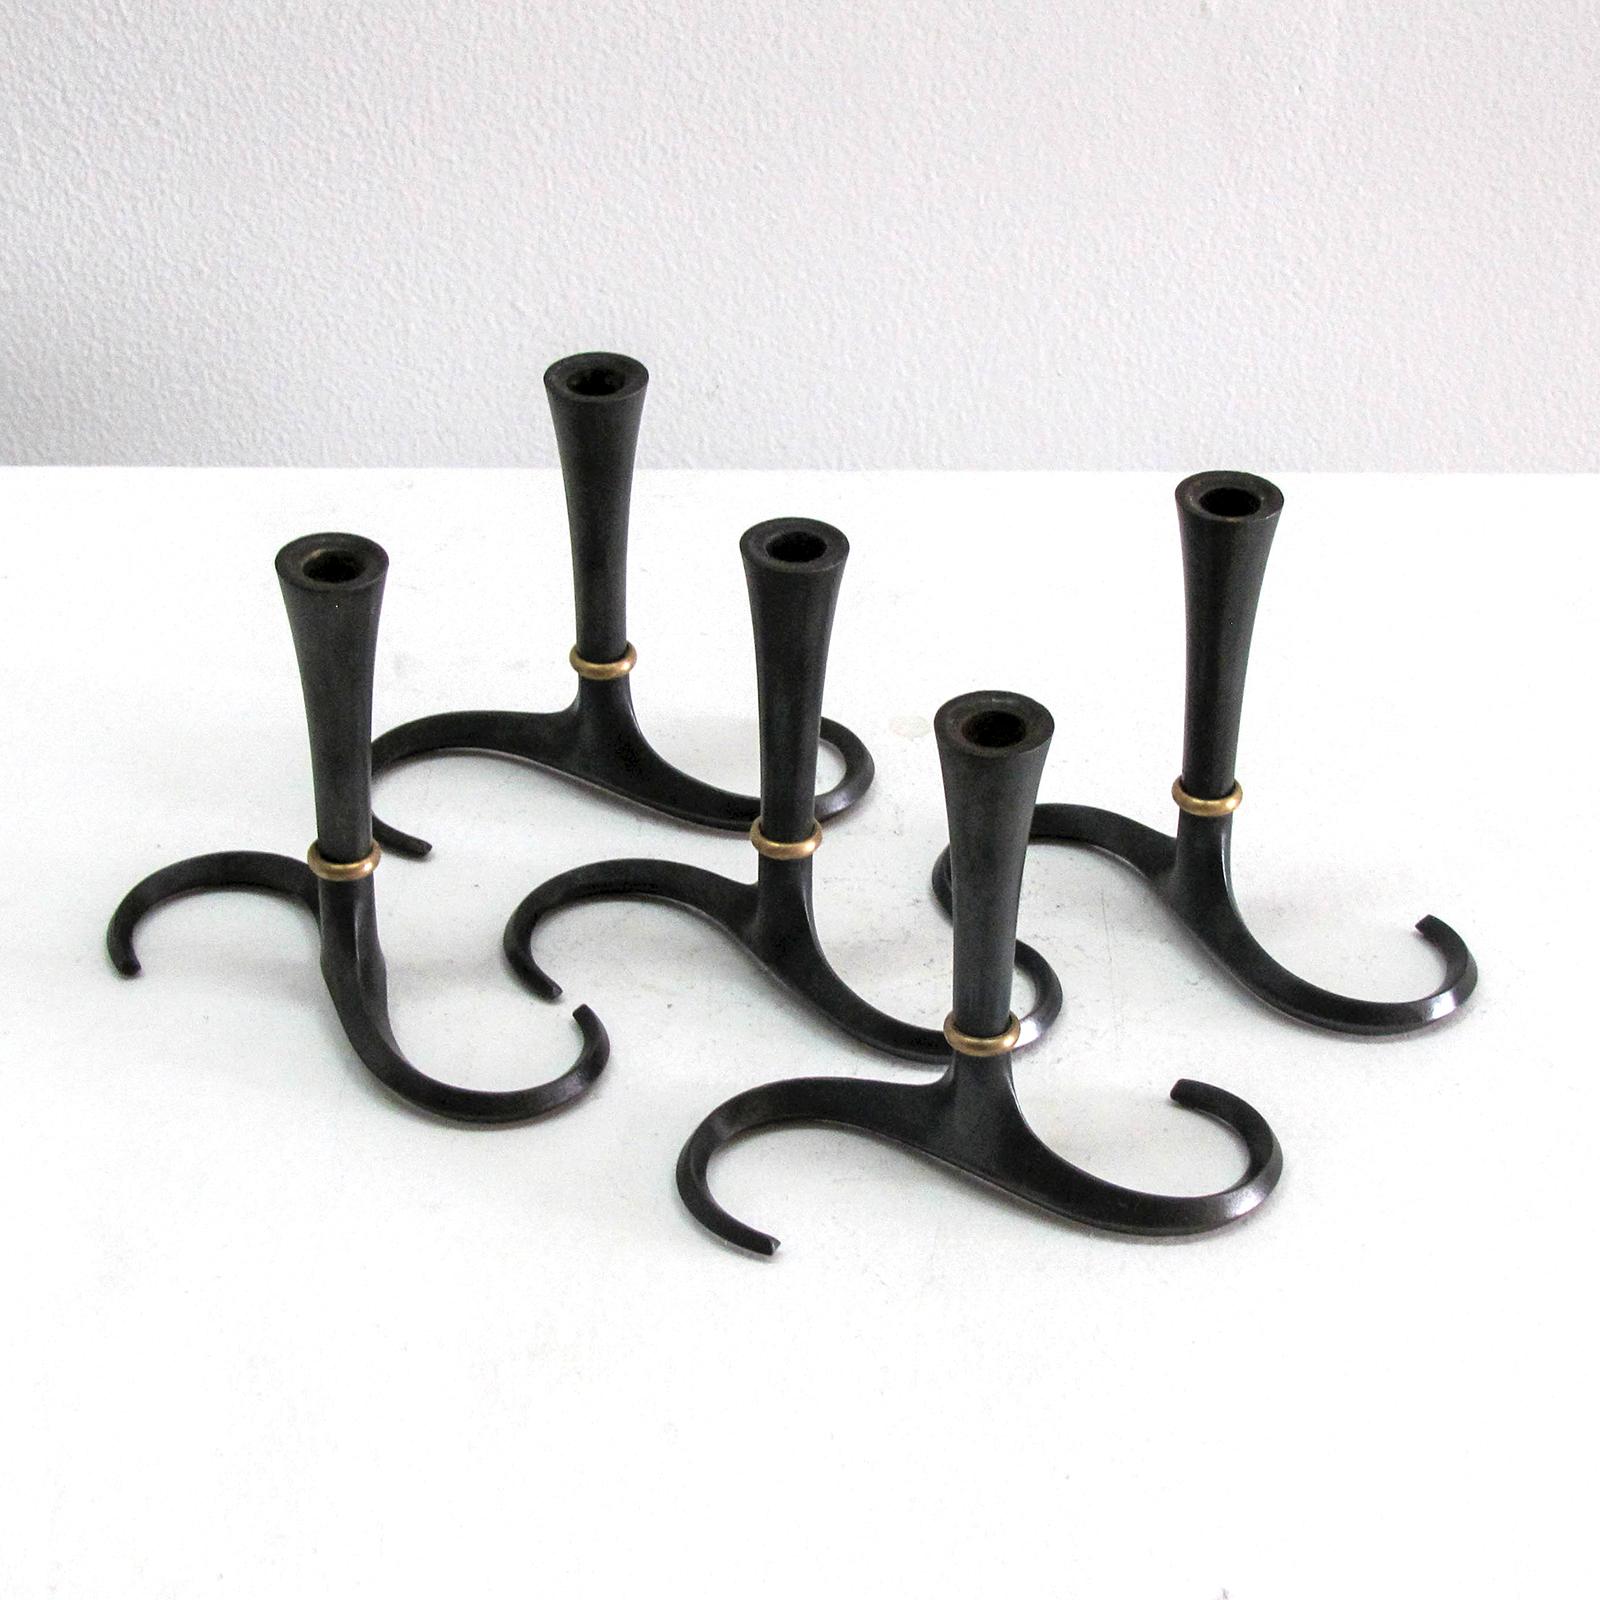 Elegant set of five cast iron candleholders by Jens Quistgaard for Dansk, black patina with brass accents, one candleholder stamped.